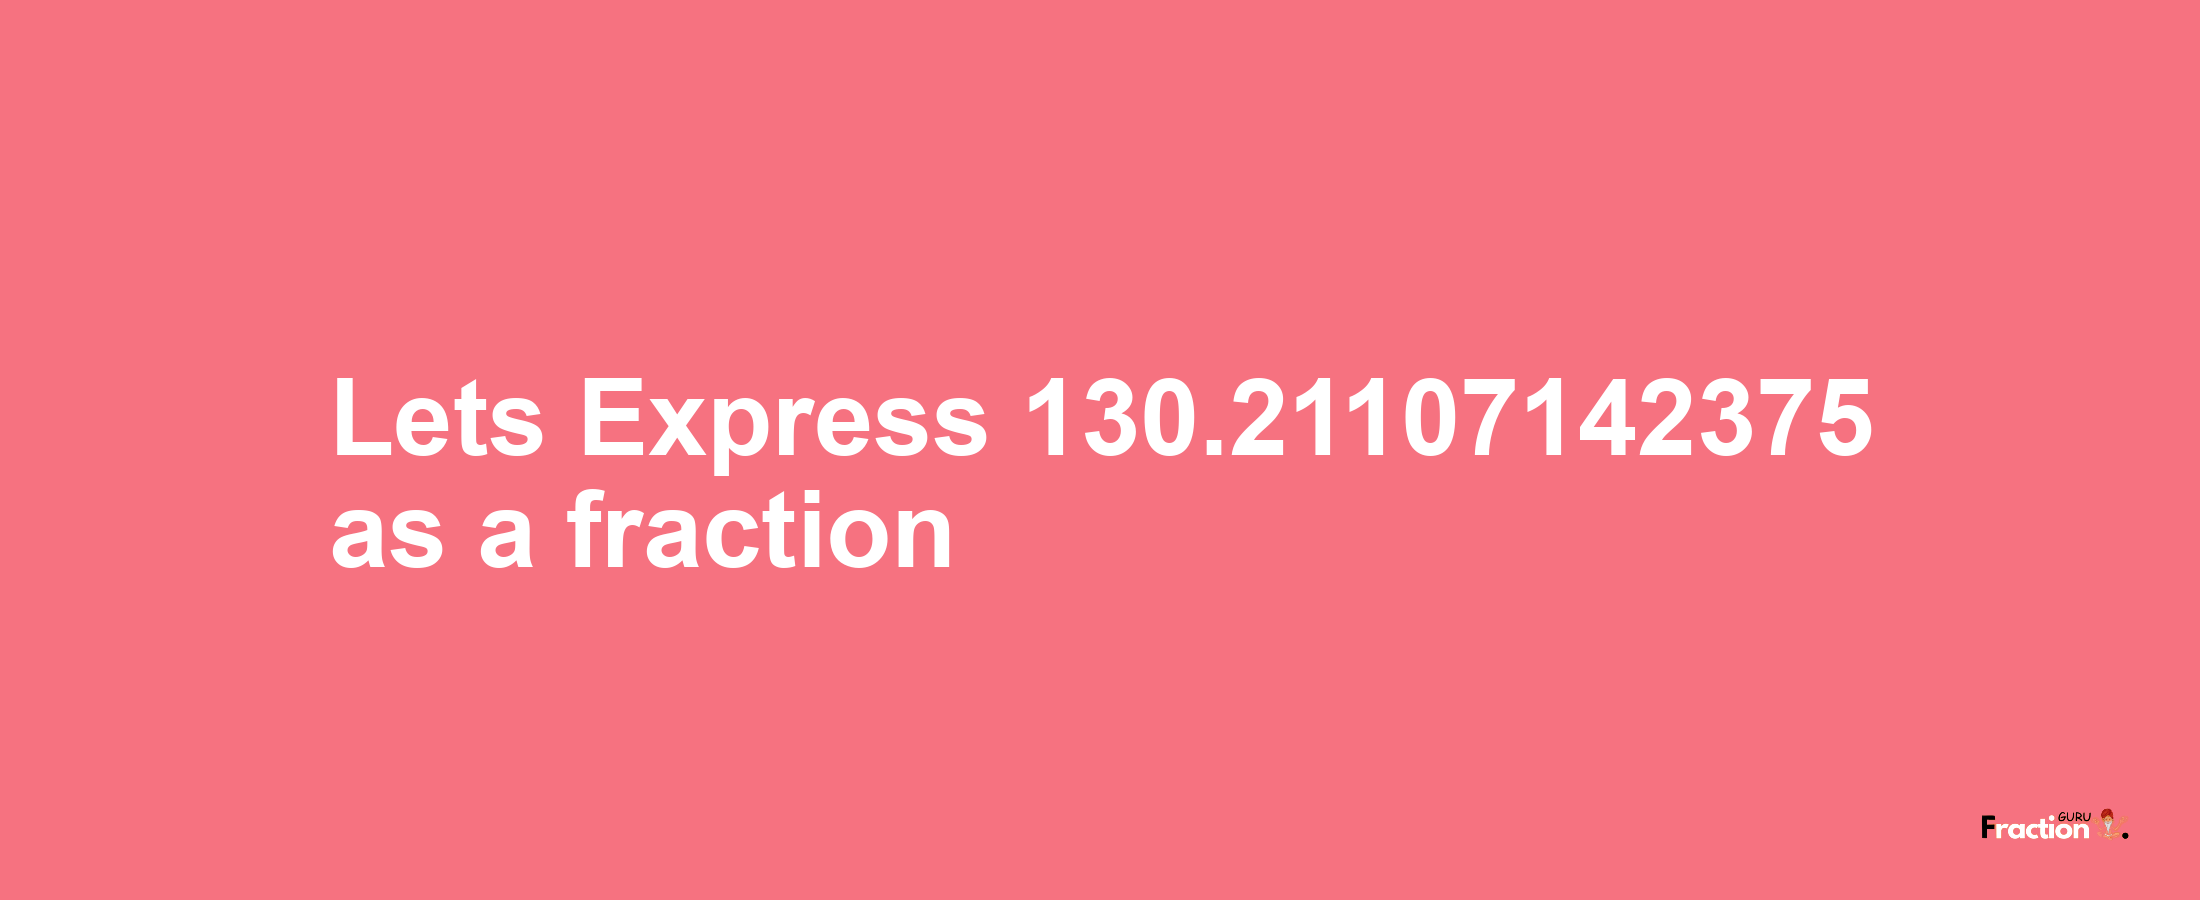 Lets Express 130.21107142375 as afraction